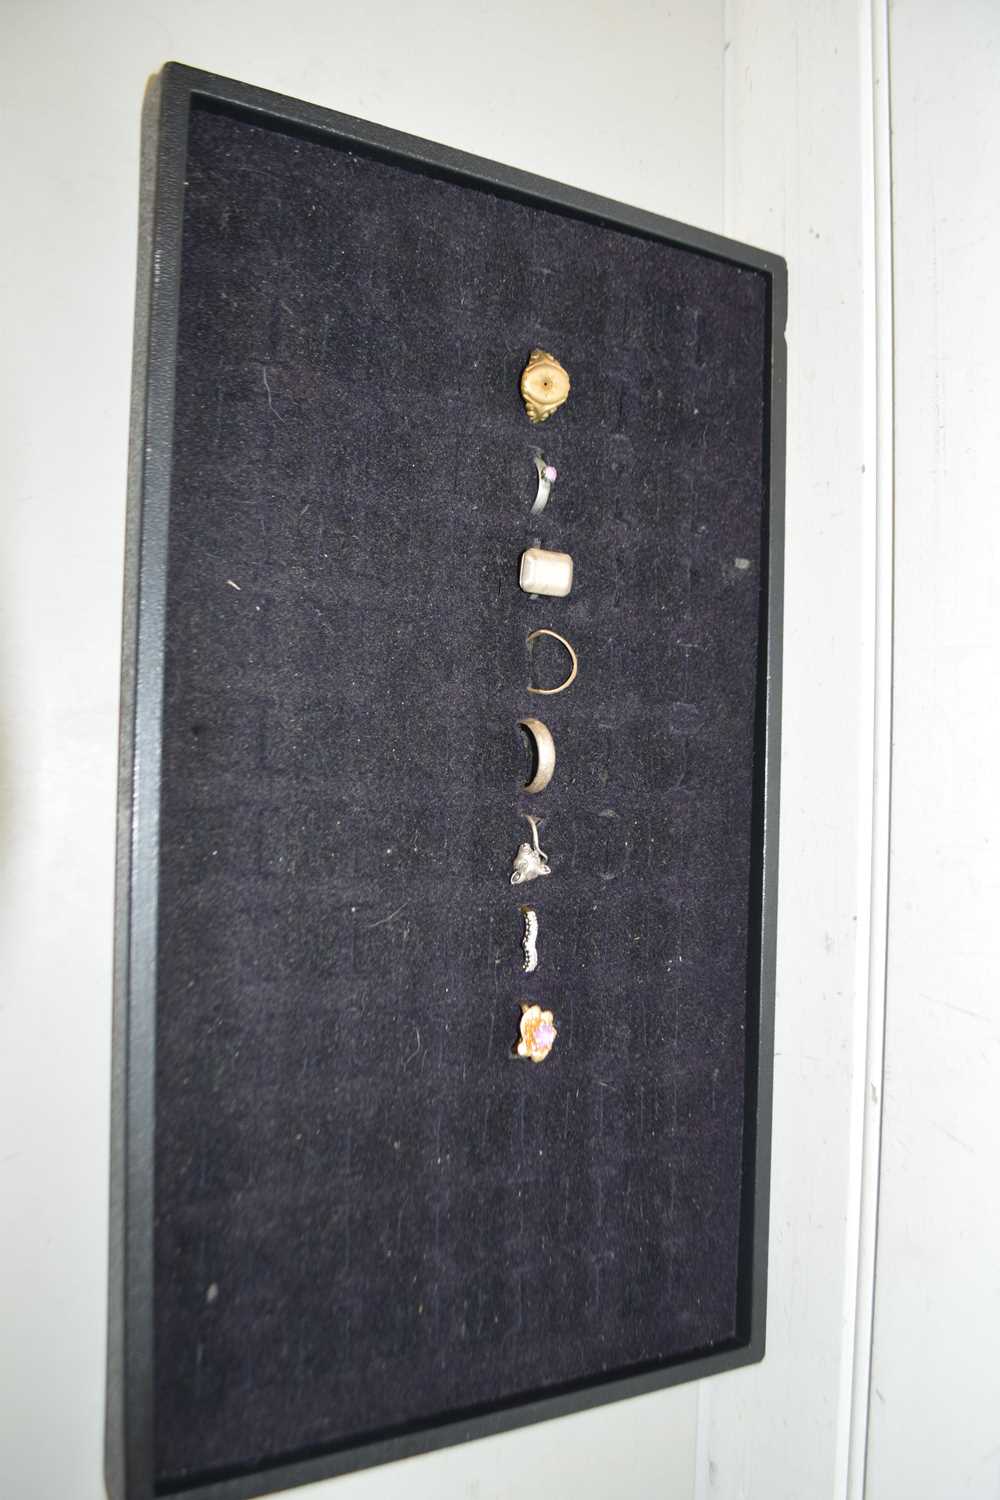 Display tray containing a collection of various assorted rings